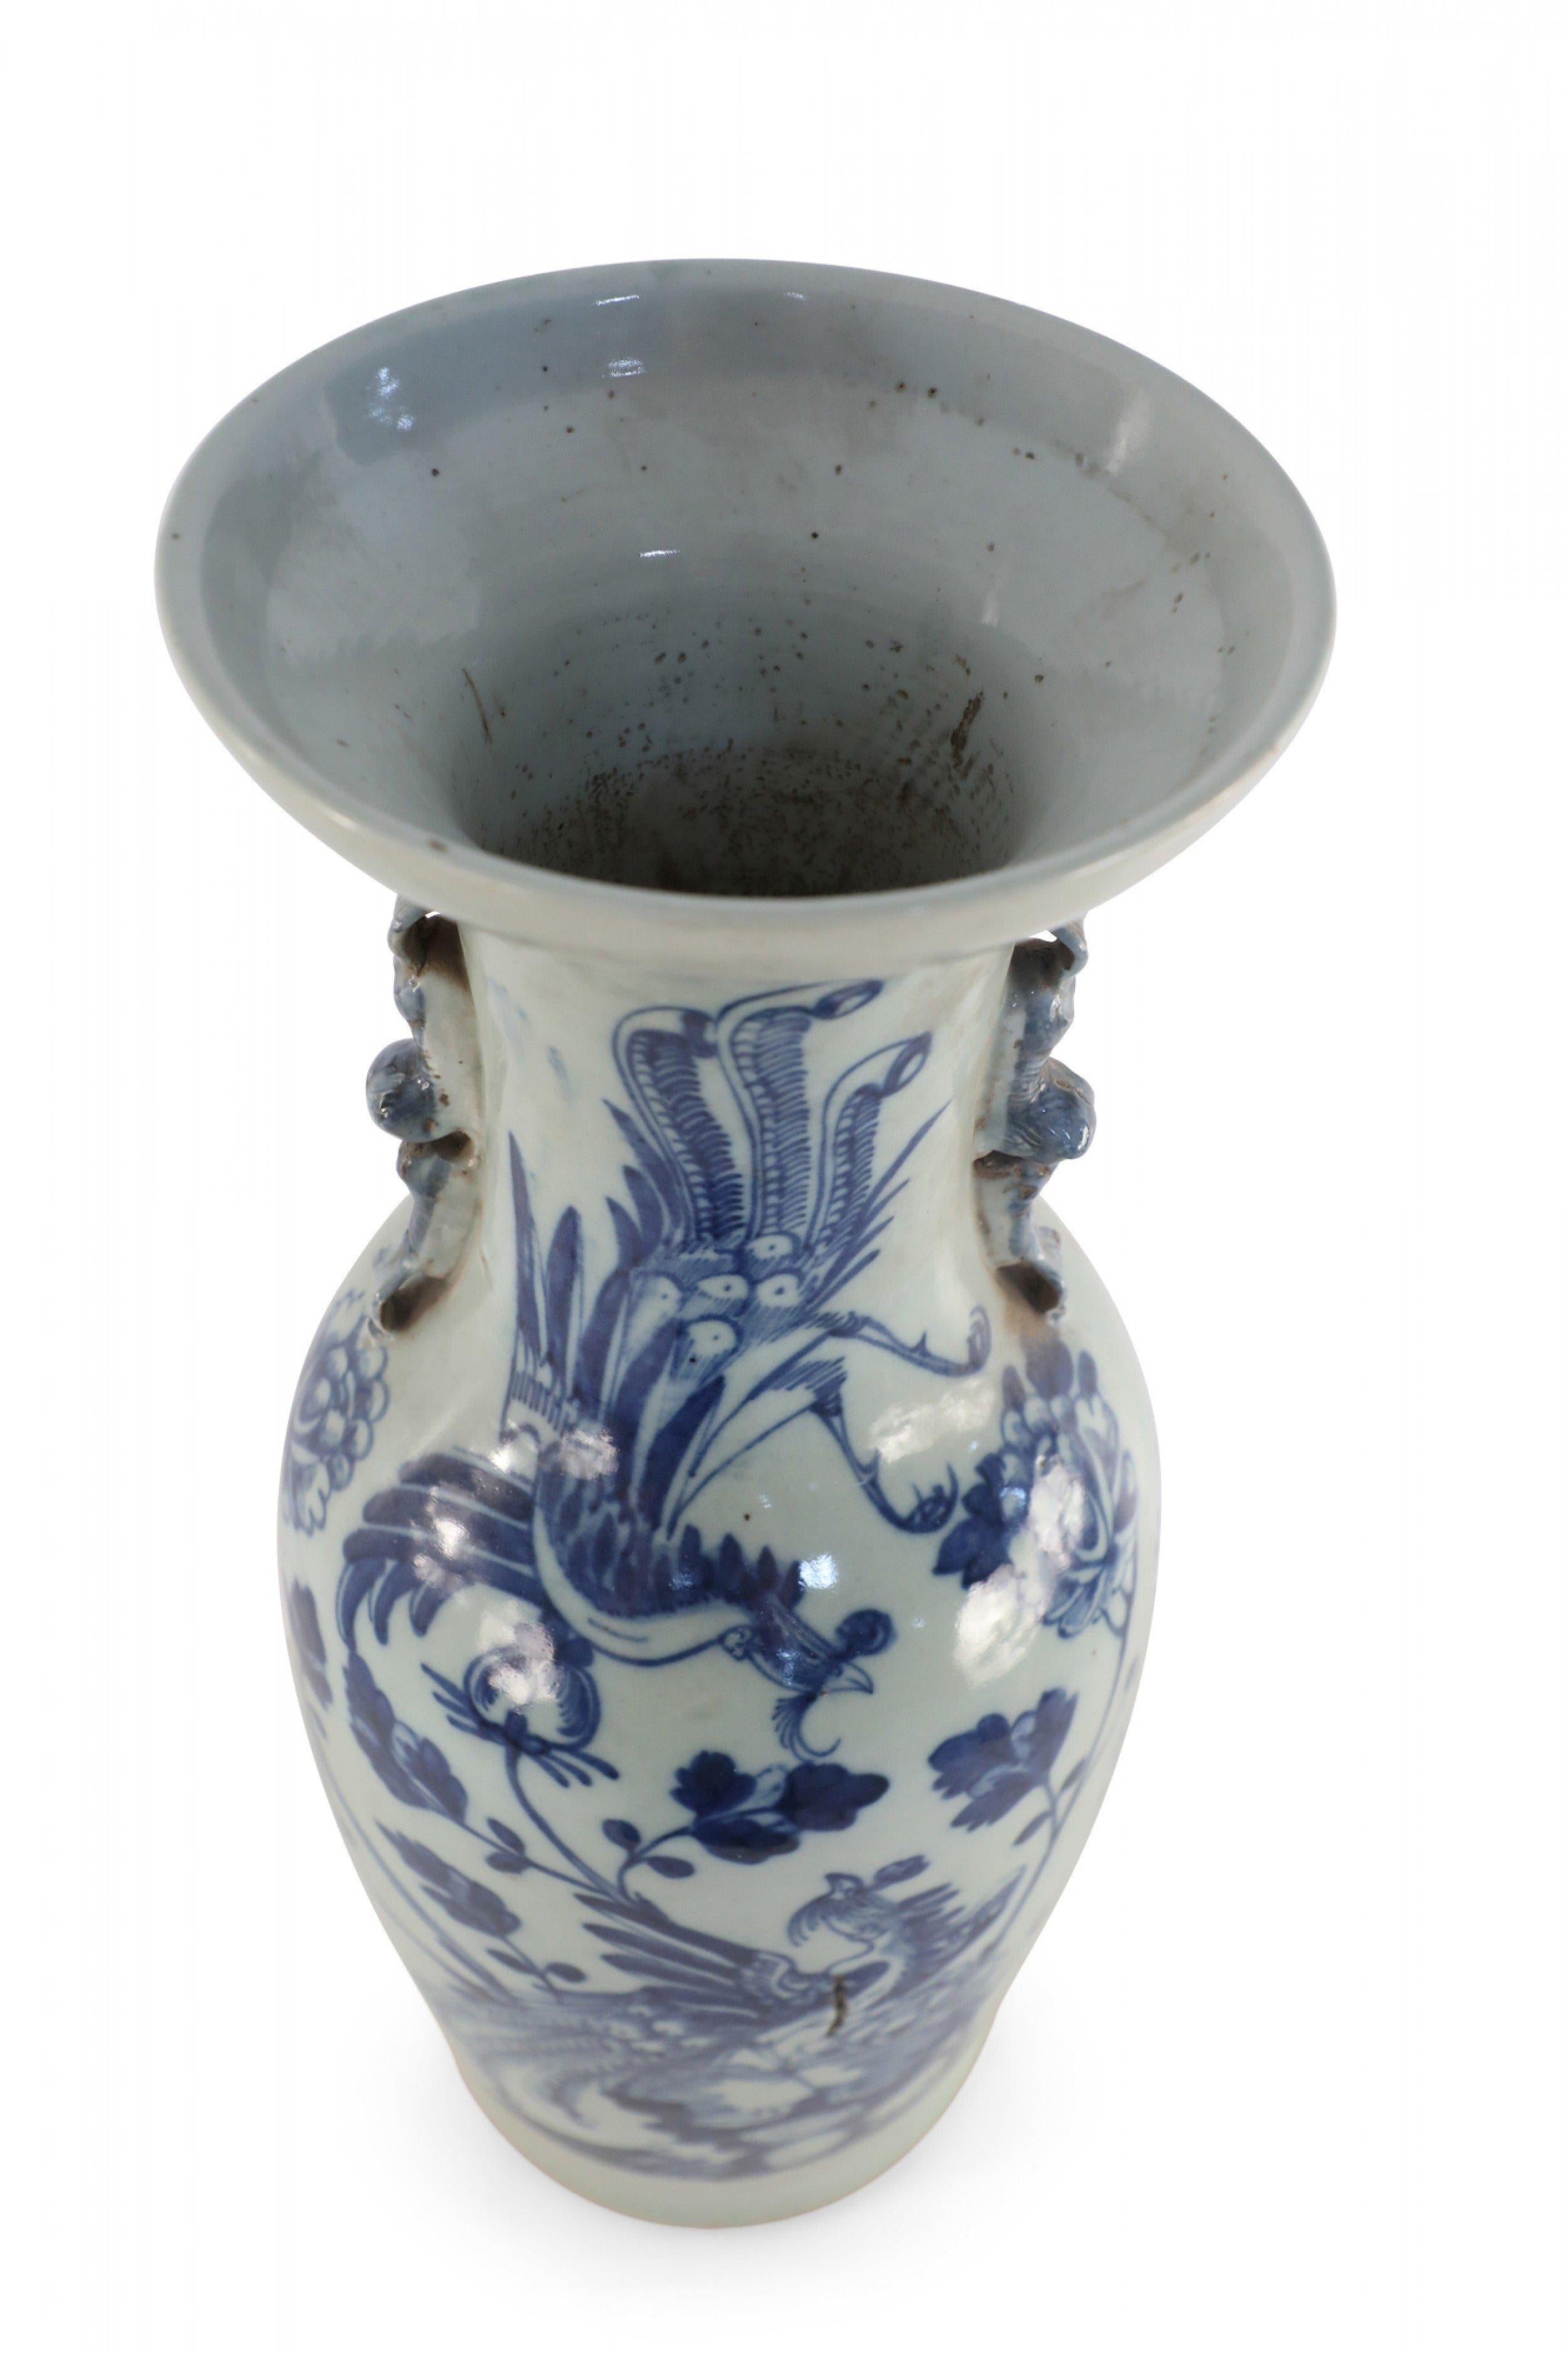 Chinese White and Blue Peacock Motif Porcelain Urn For Sale 4